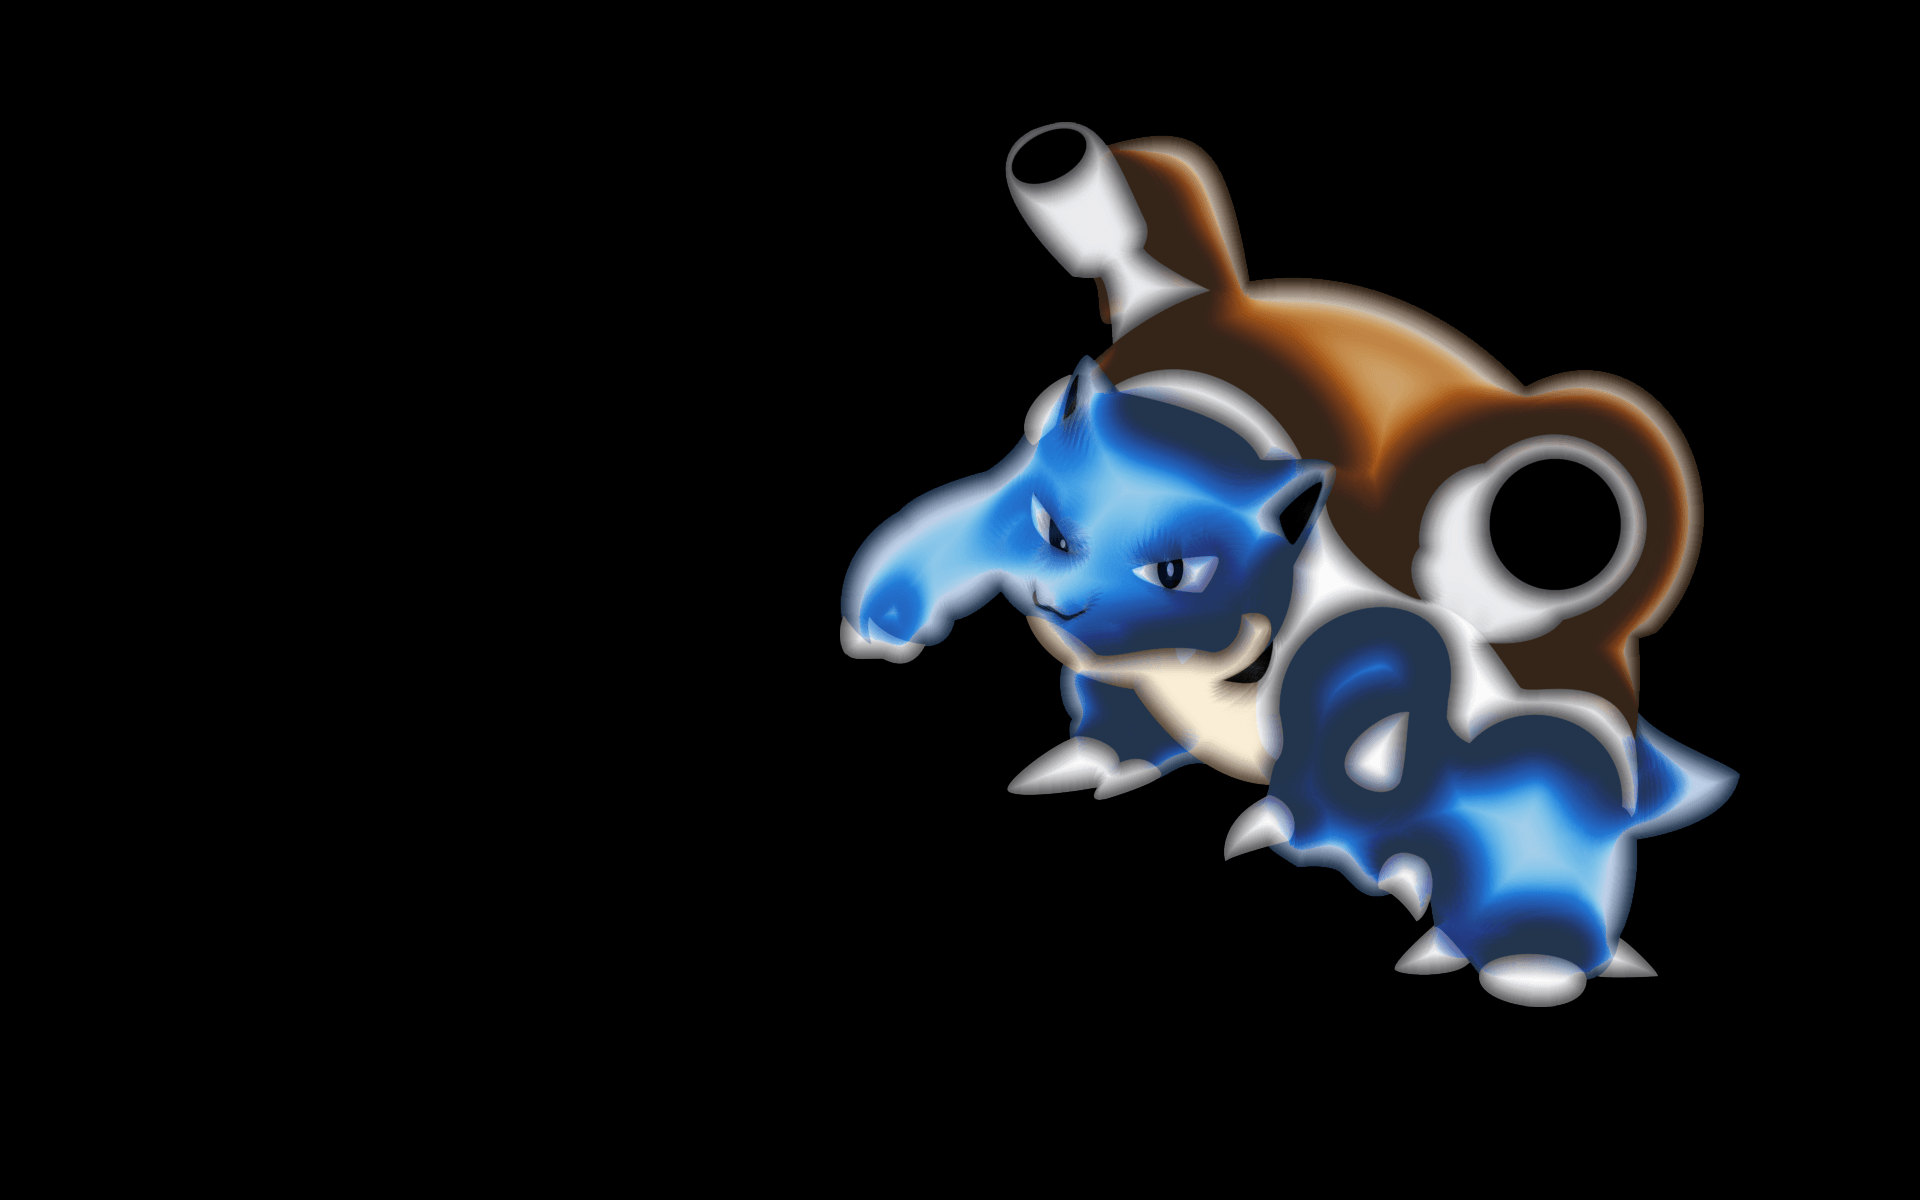 For that Guy that wanted a Blastoise Wallpaper